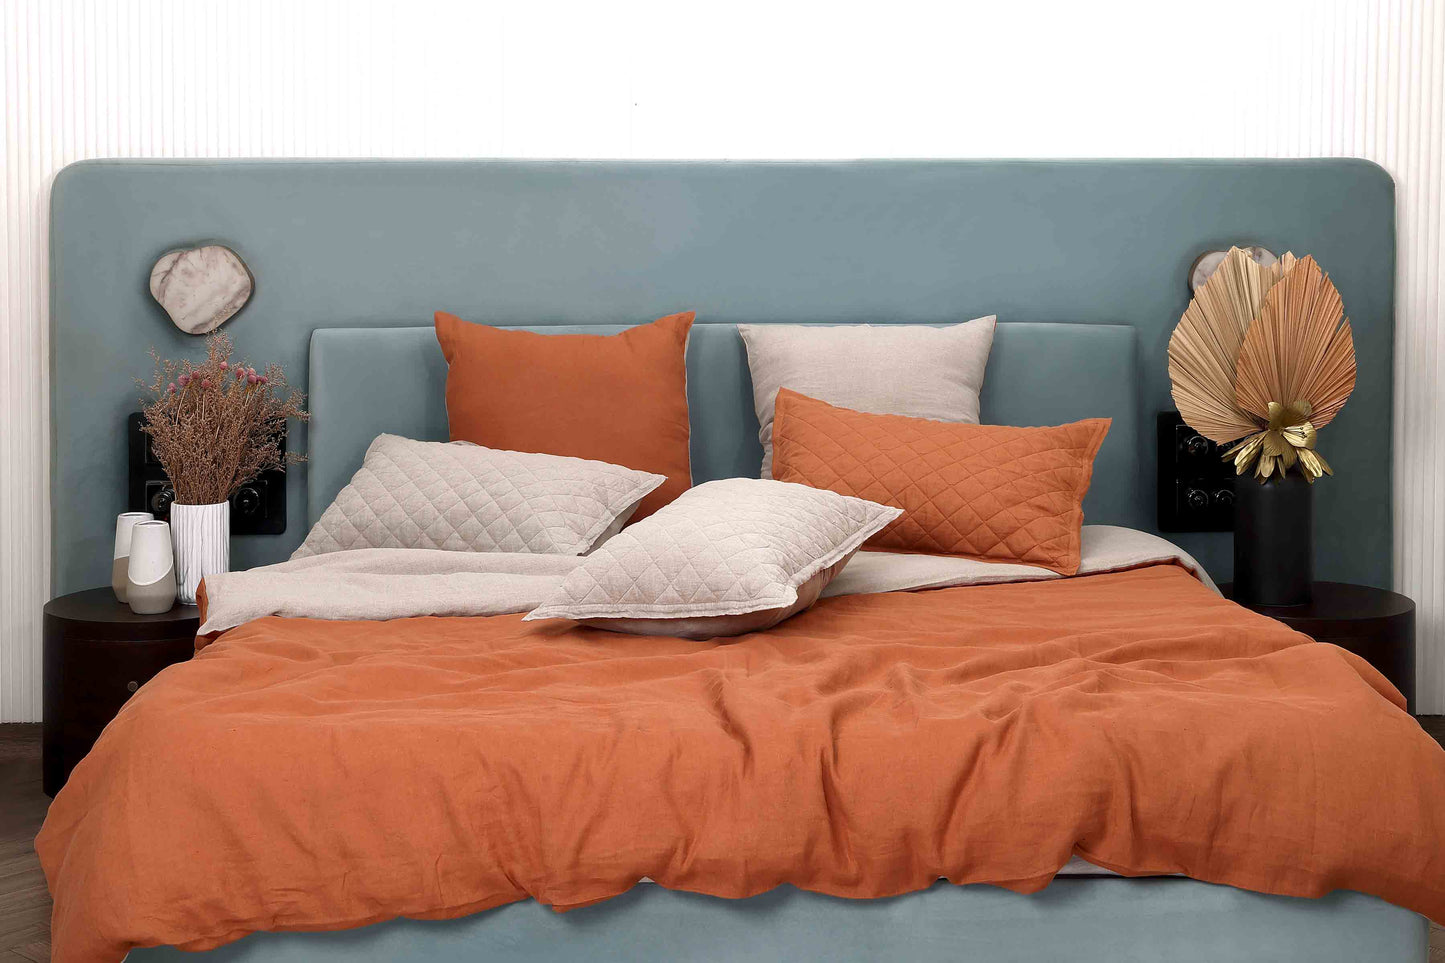 Load image into Gallery viewer, Caramel and Natural Duvet Set
